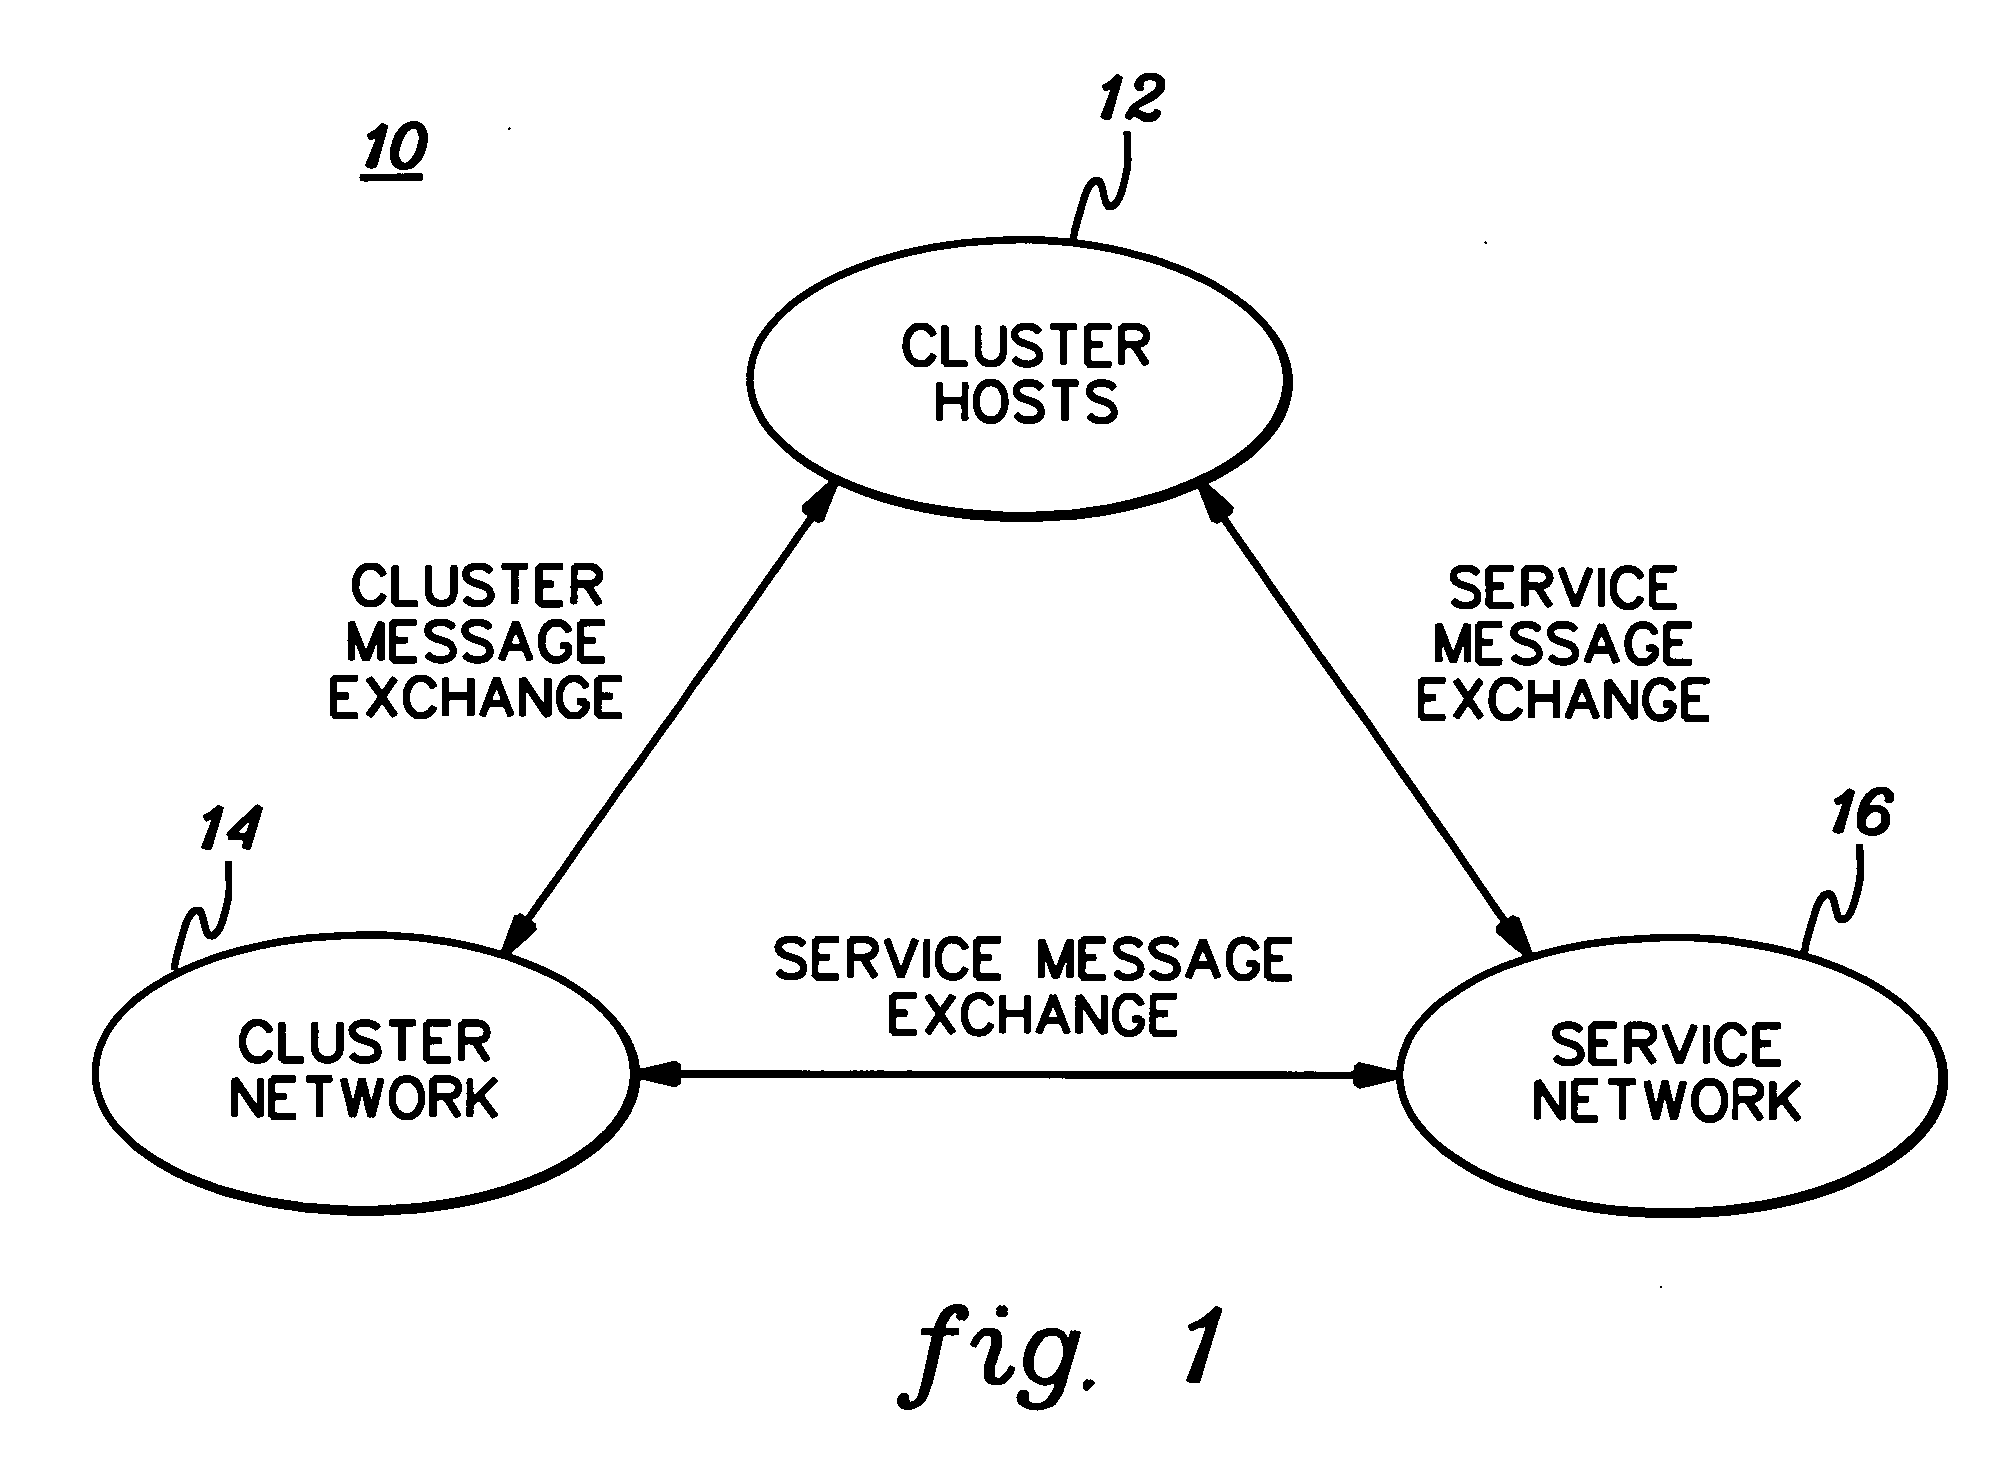 Reliable message transfer over an unreliable network